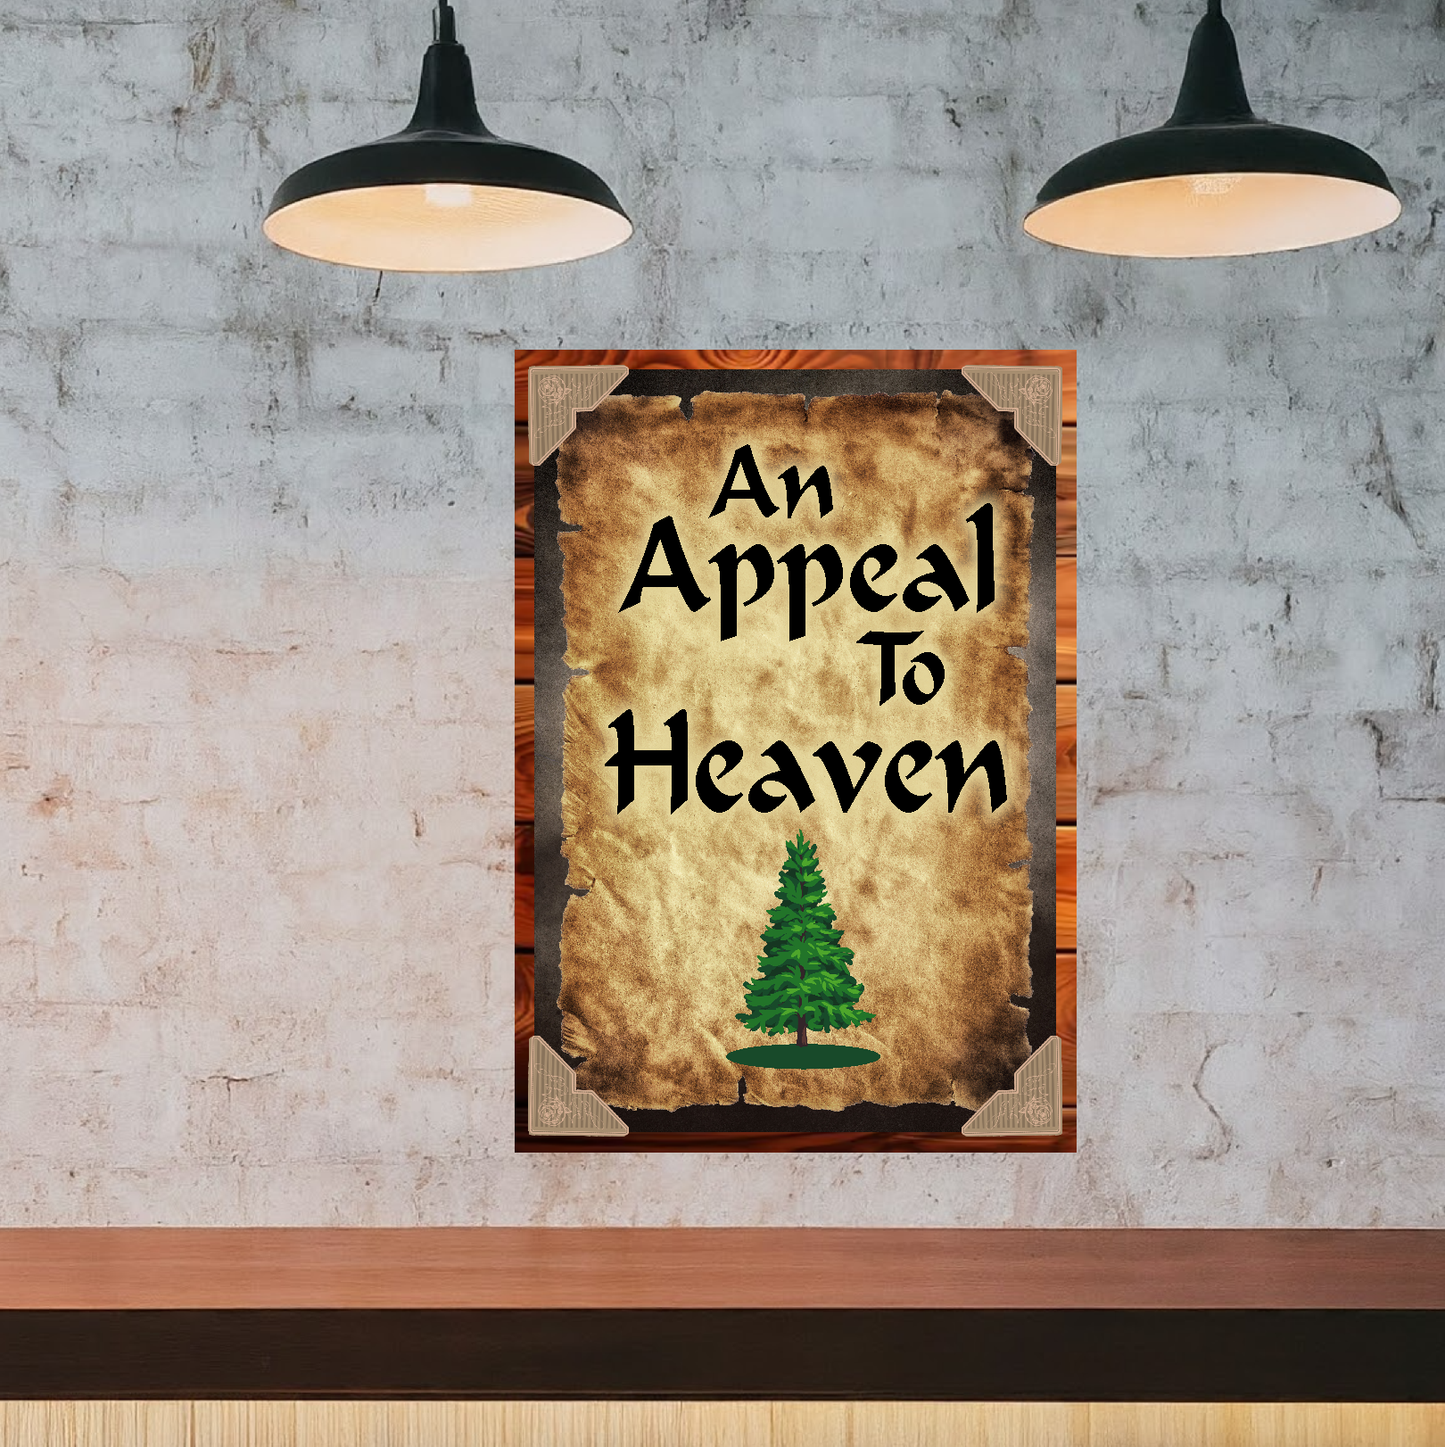 An Appeal To Heaven (Vertical) - 12" x 18" Vintage Metal Sign